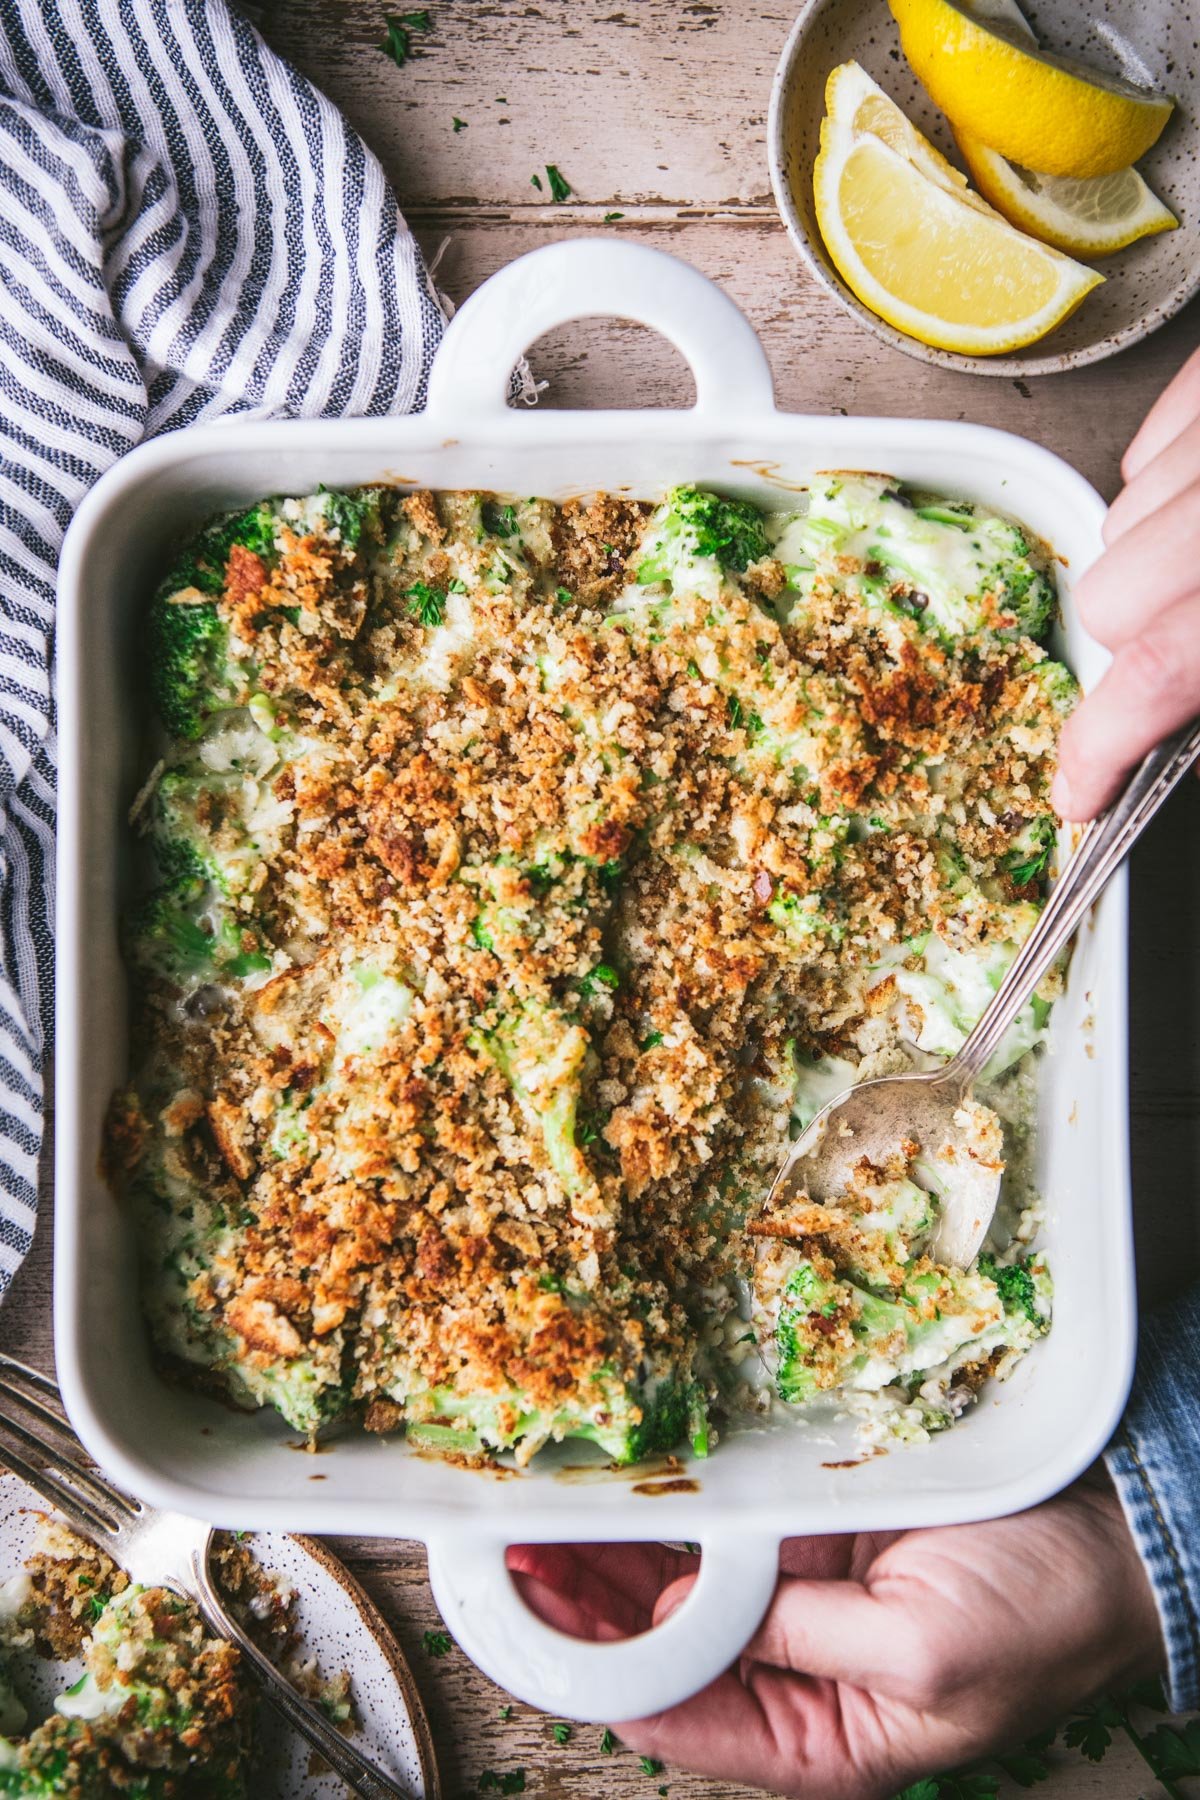 Overhead shot of hands serving an easy broccoli casserole from a white dish